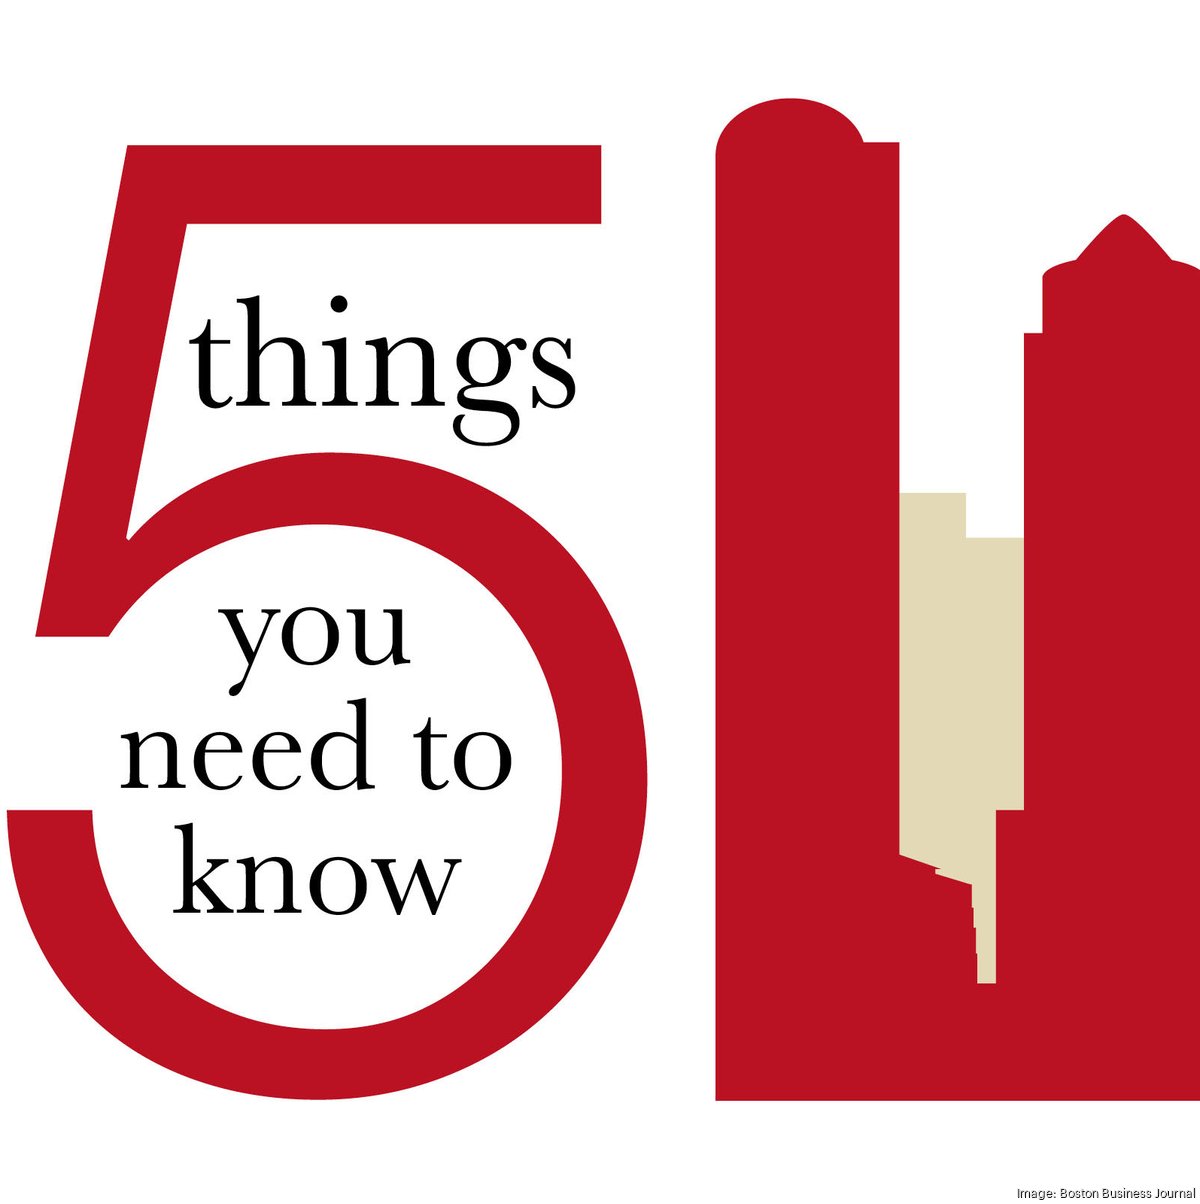 5 things to know about living in Saugus - Buying -  Real